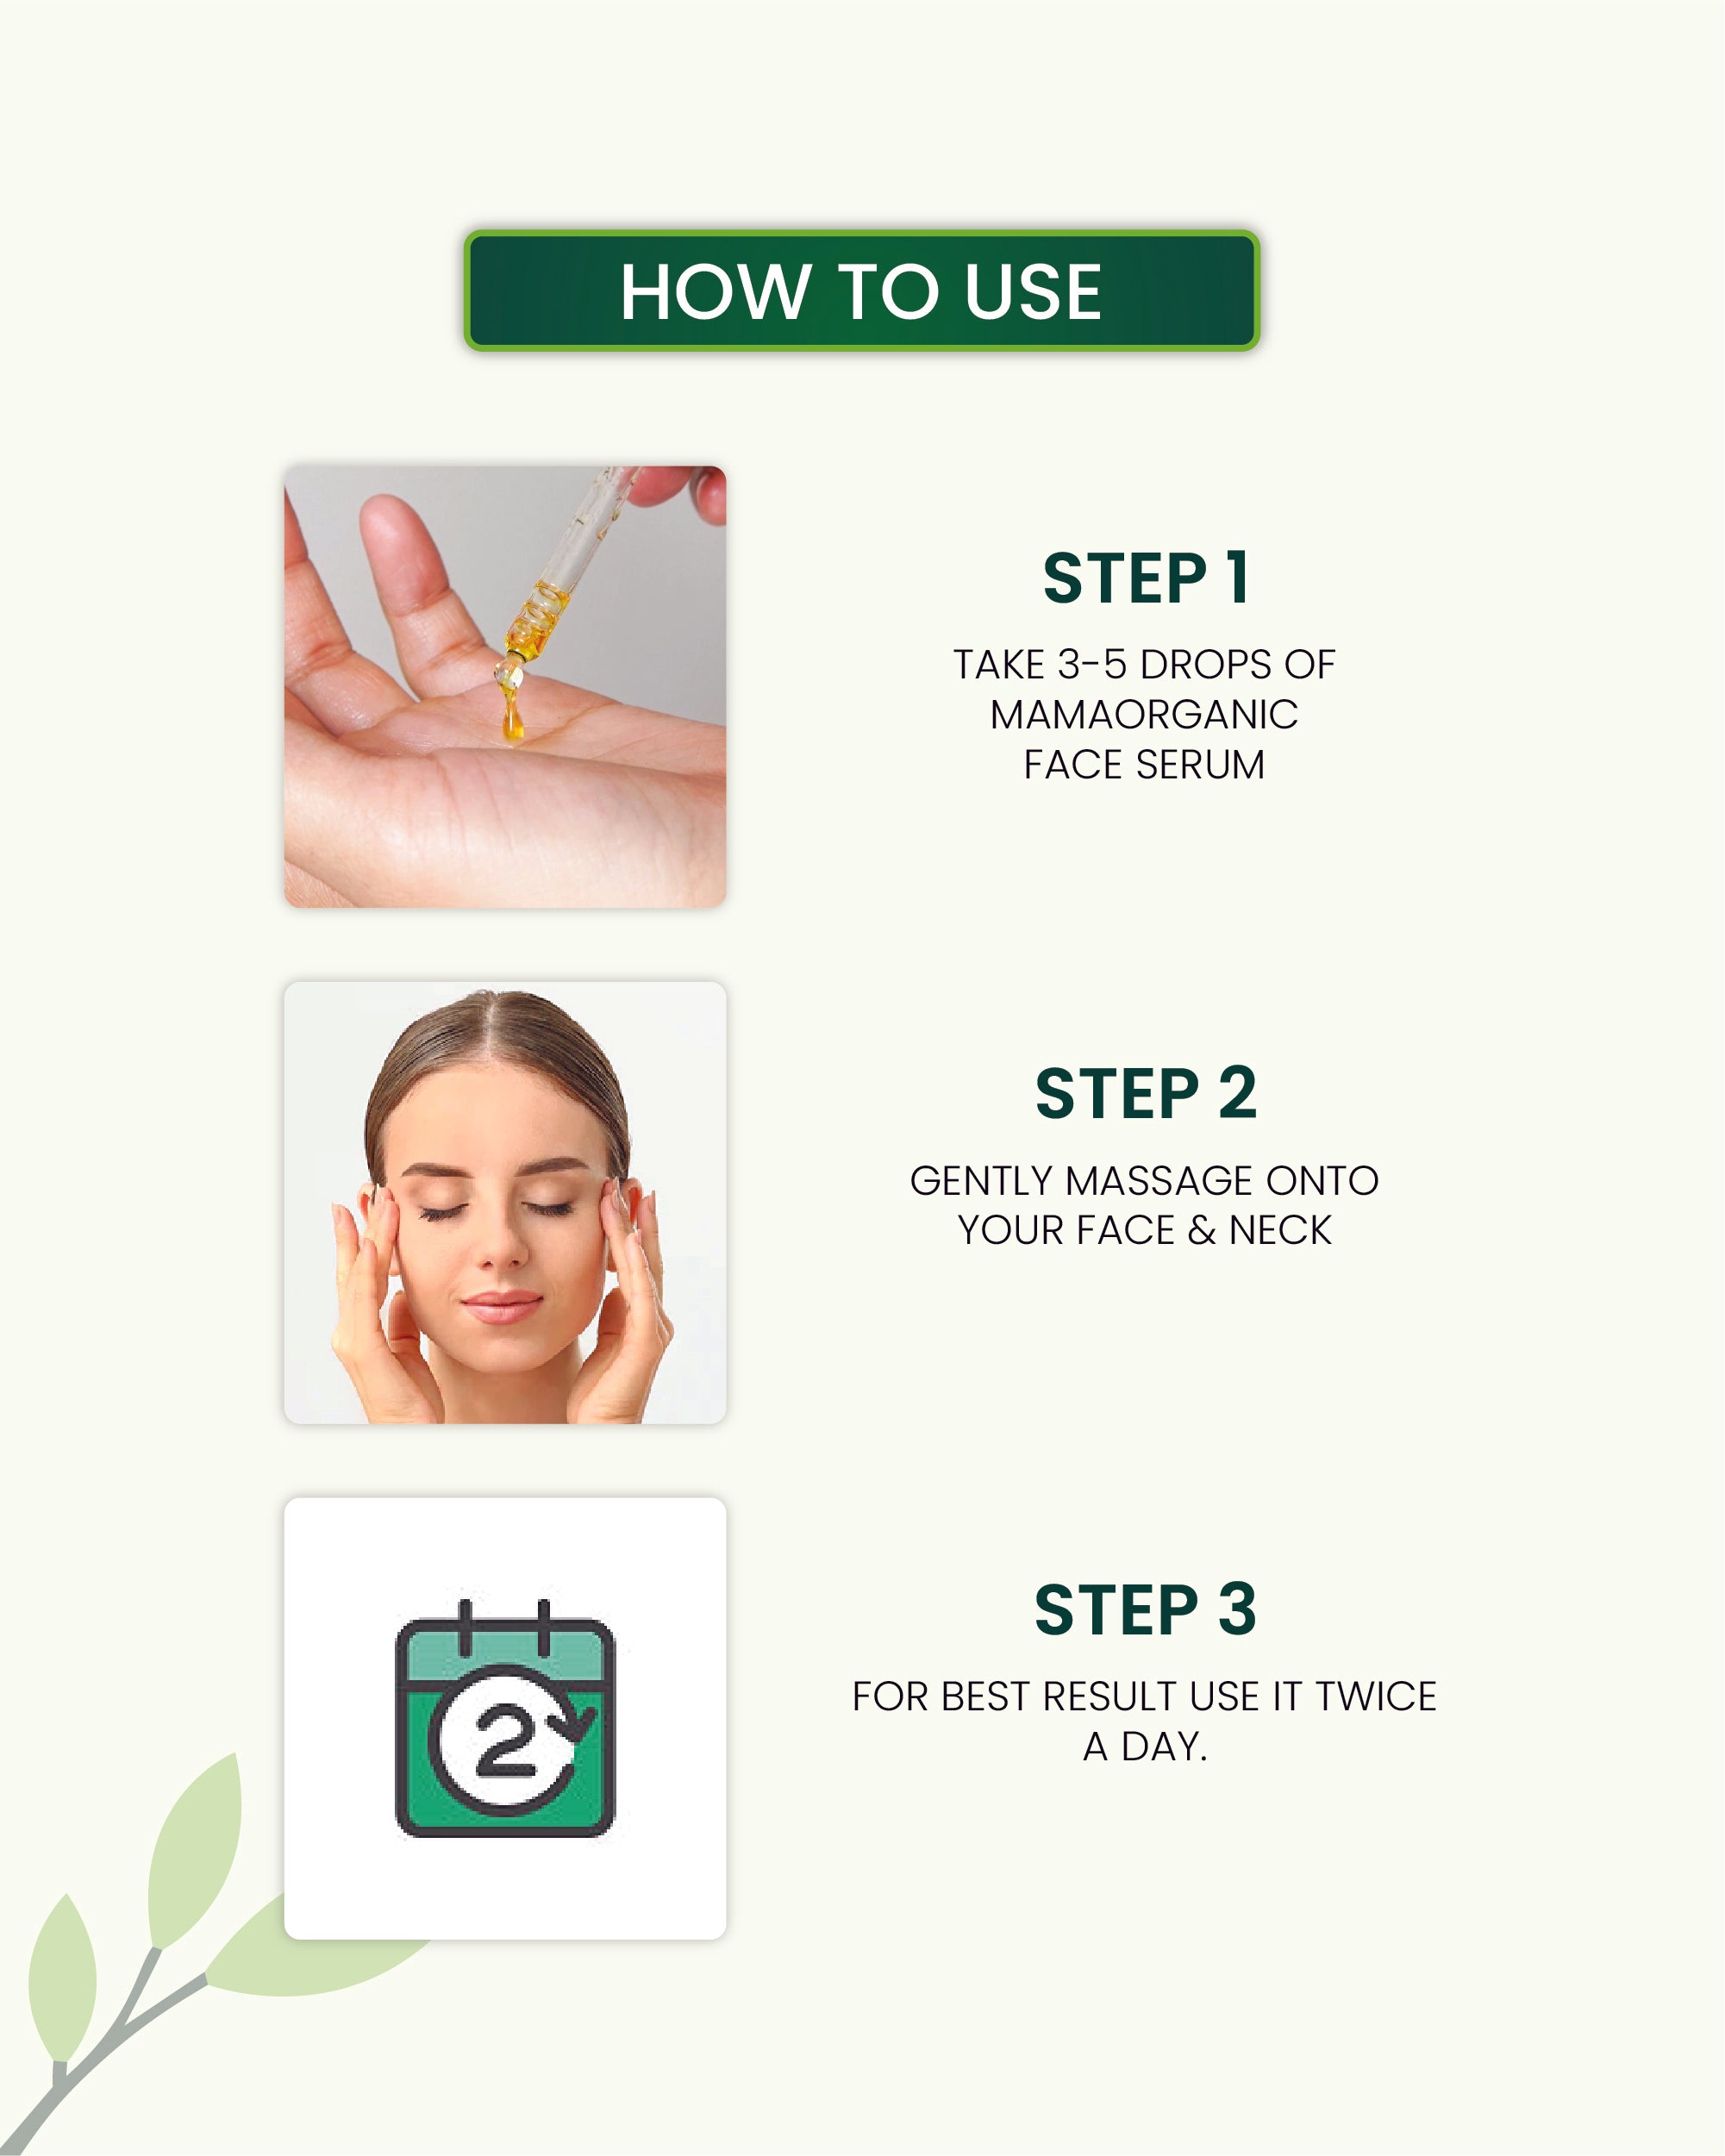 How to Use Vitamin C Face Serum 